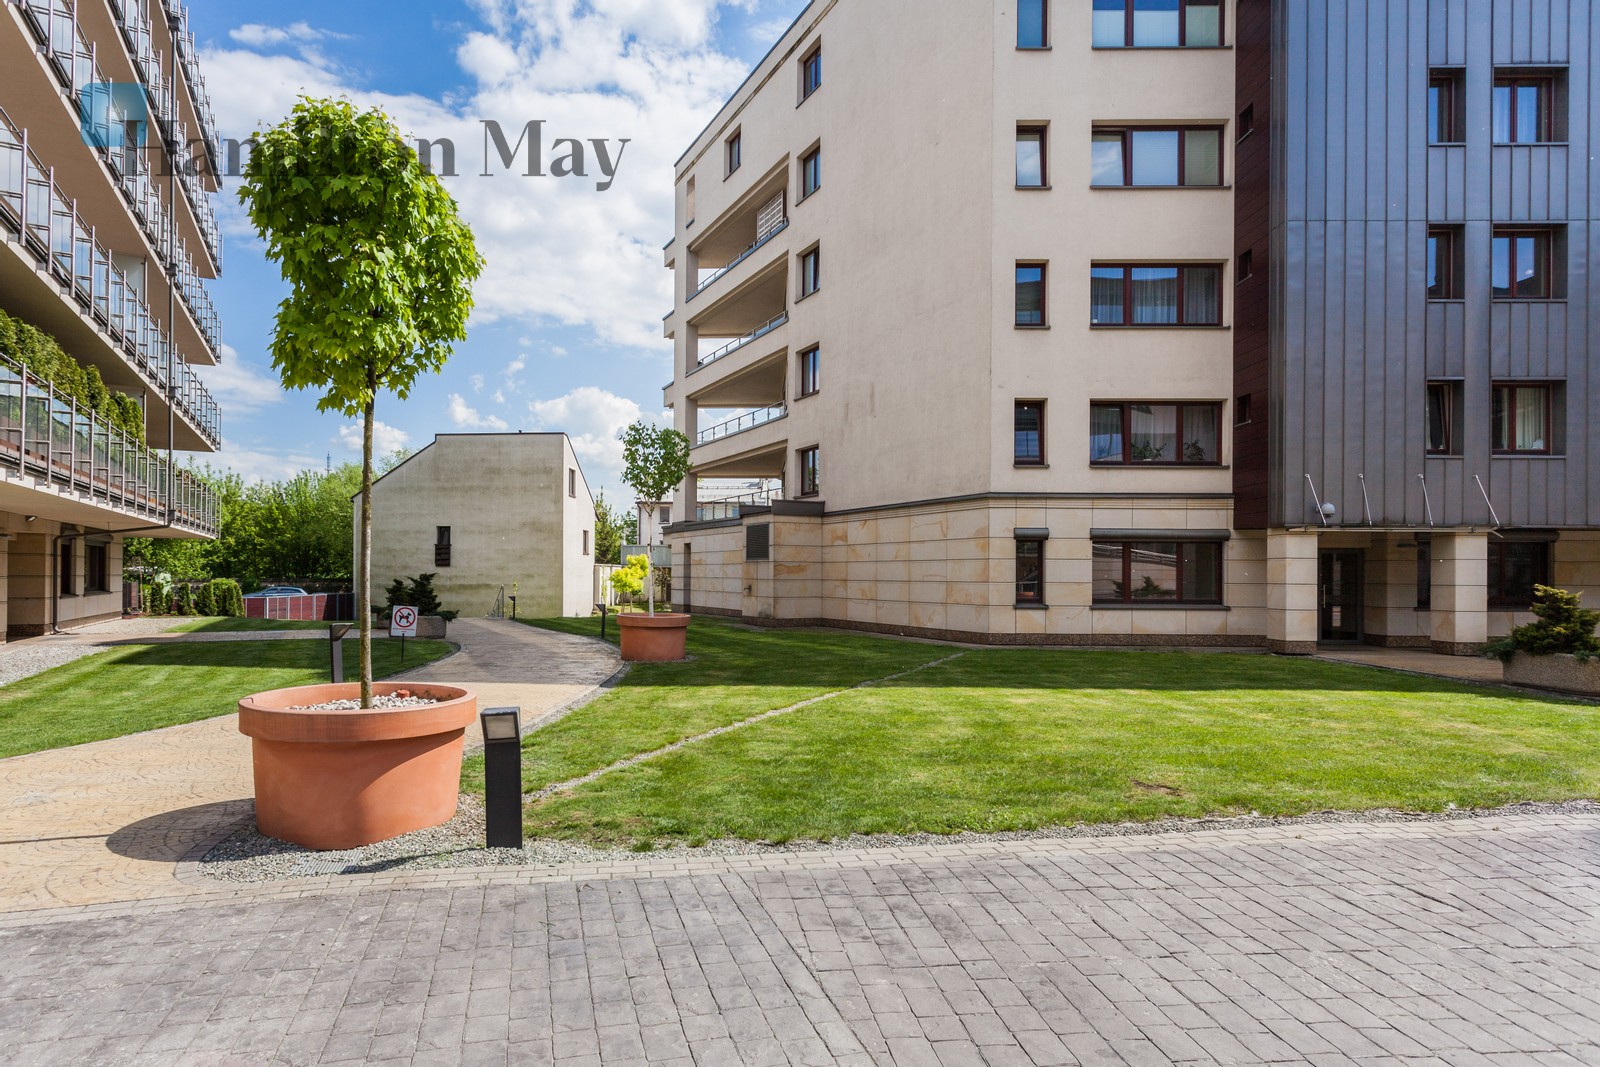 Status: existing Number of units: 270 Sale price from: 60000PLN Avg. sales price/m2: 10500PLN Rental price from: 3000PLN Avg. rental price/m2: 50PLN - slider